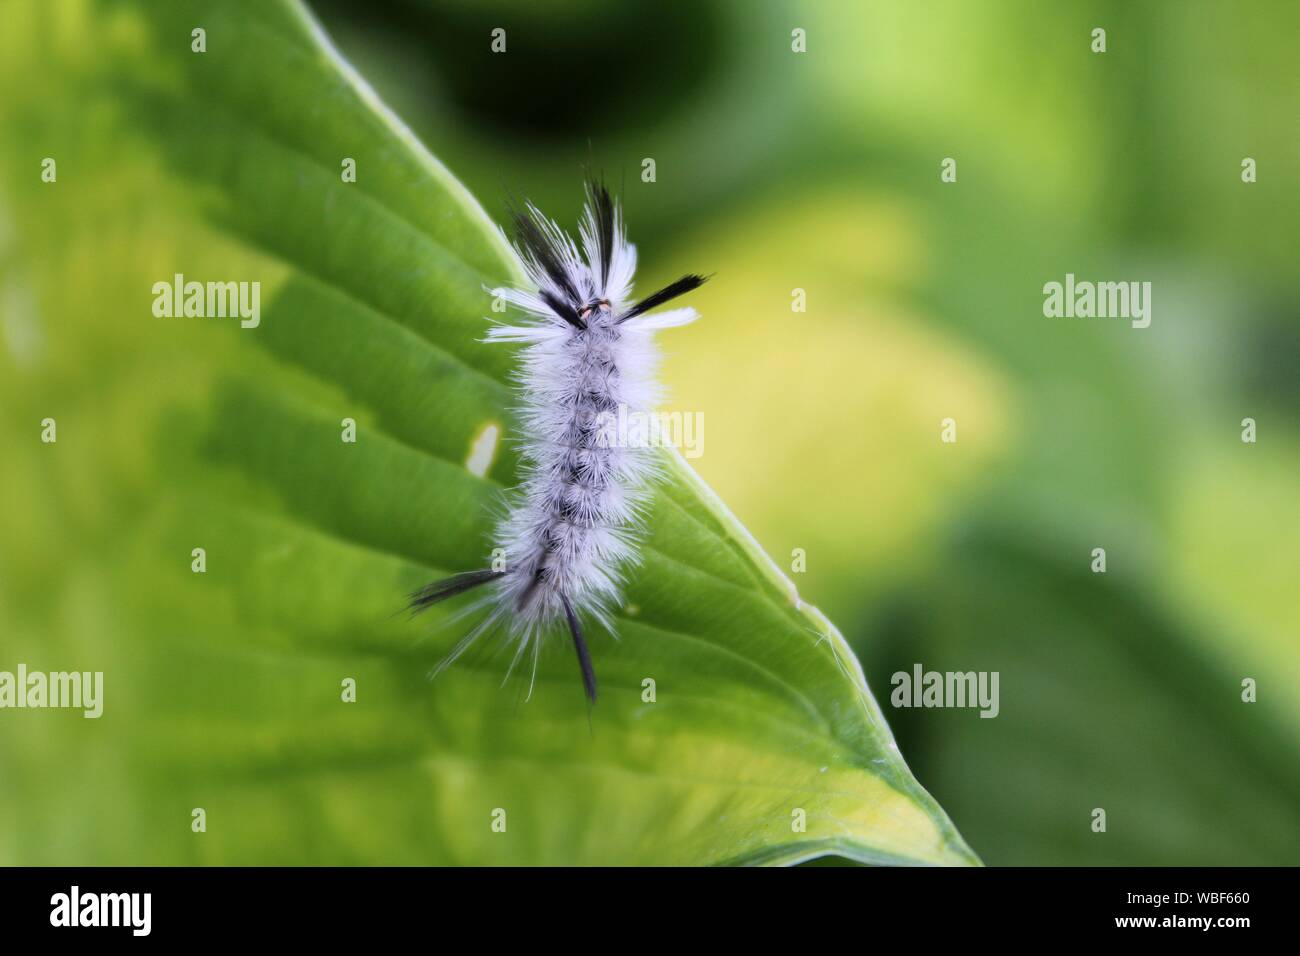 A White Hickory Tussock Moth Caterpillar On A Hosta Leaf Stock Photo